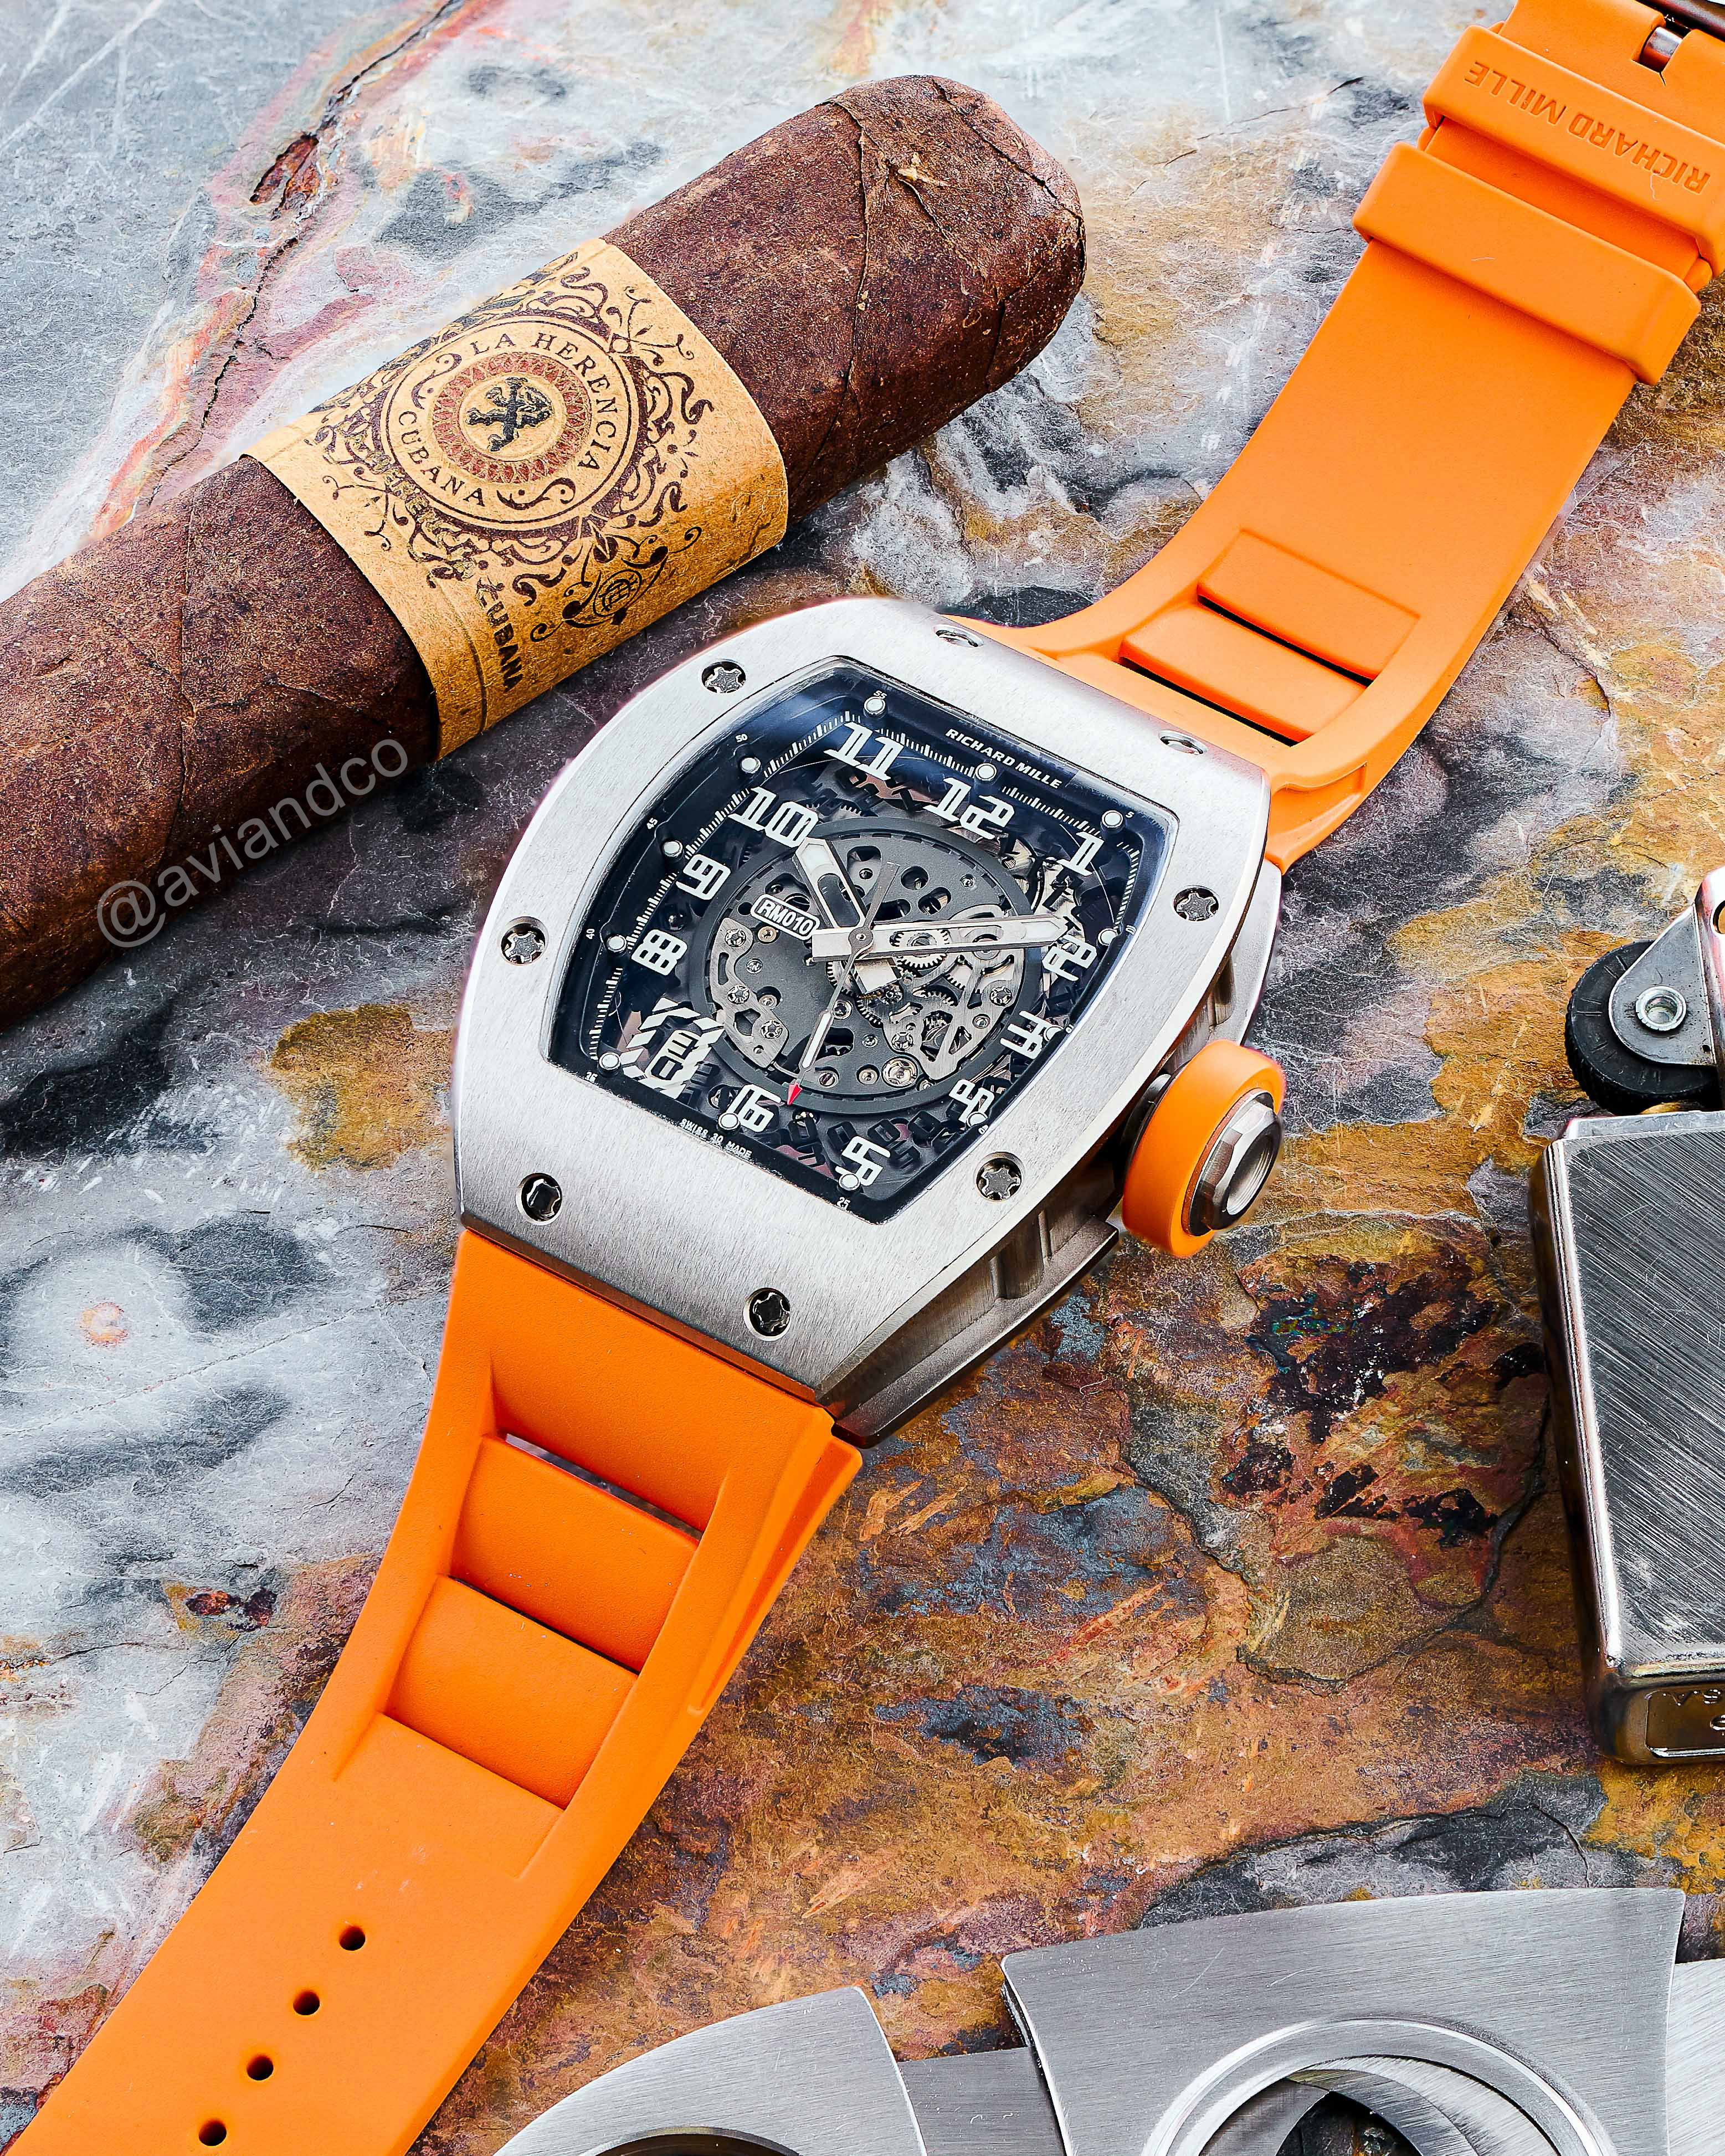 Stainless Steel Bezel with Skeleton Dial and Neon Orange Rubber Strap on a Marble Tabletop Surrounded by a Cuban Cigar, Lighter, and Cutter